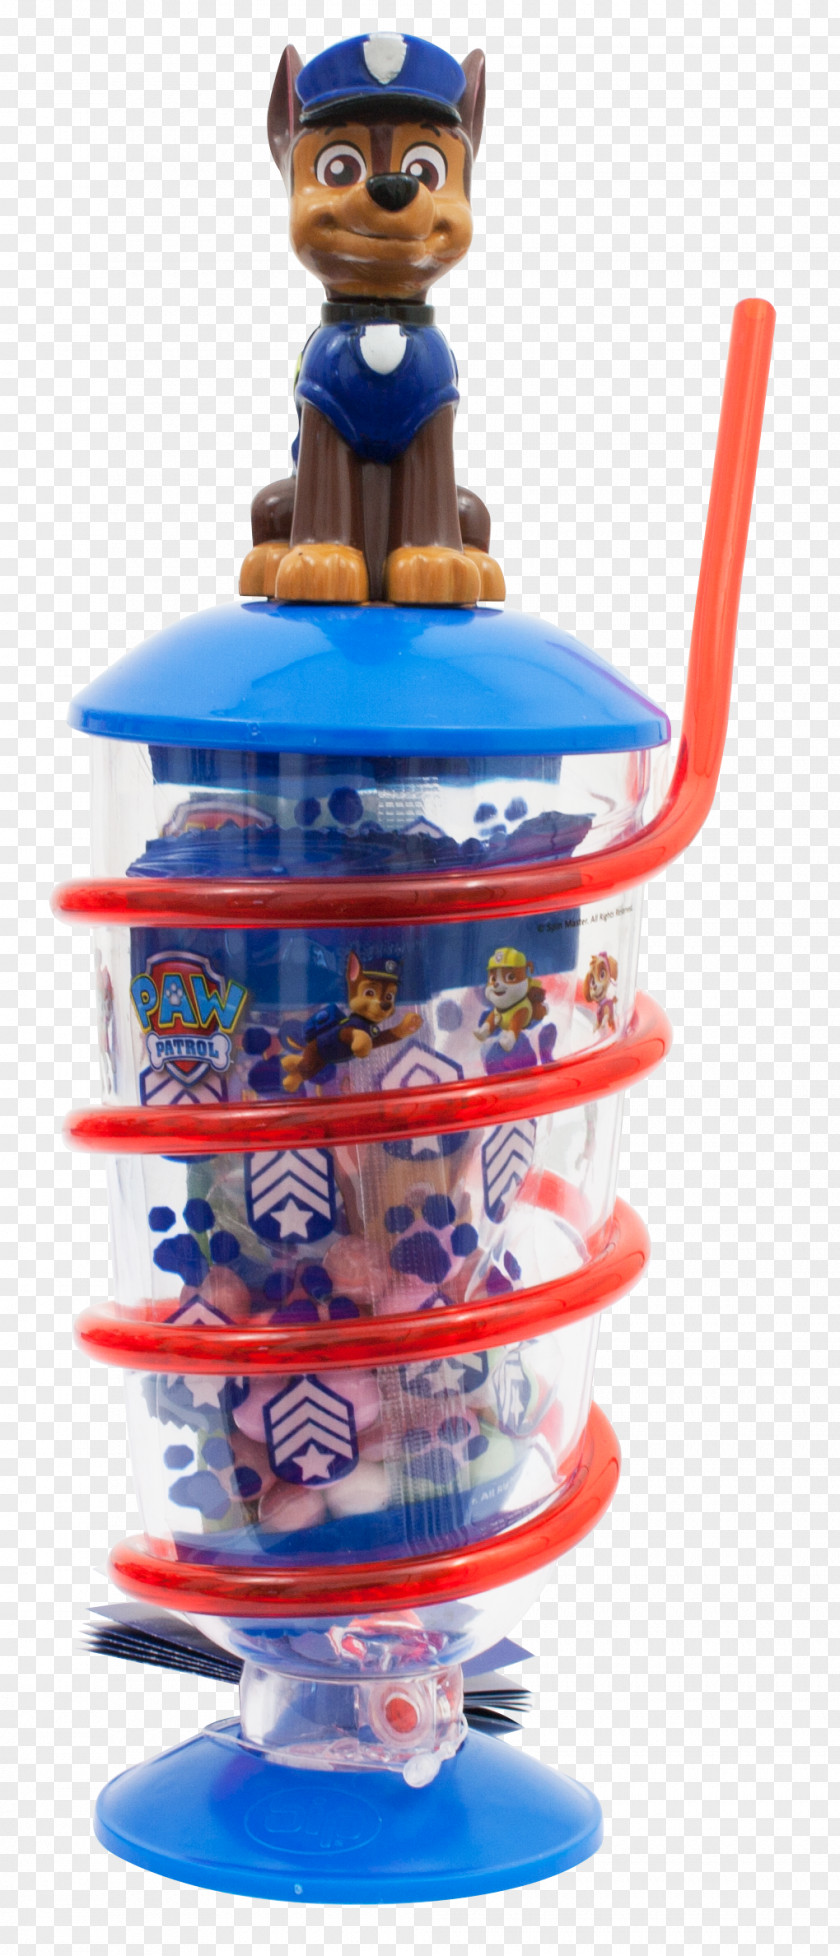 Cup Toy Drinking Straw Candy Container PNG